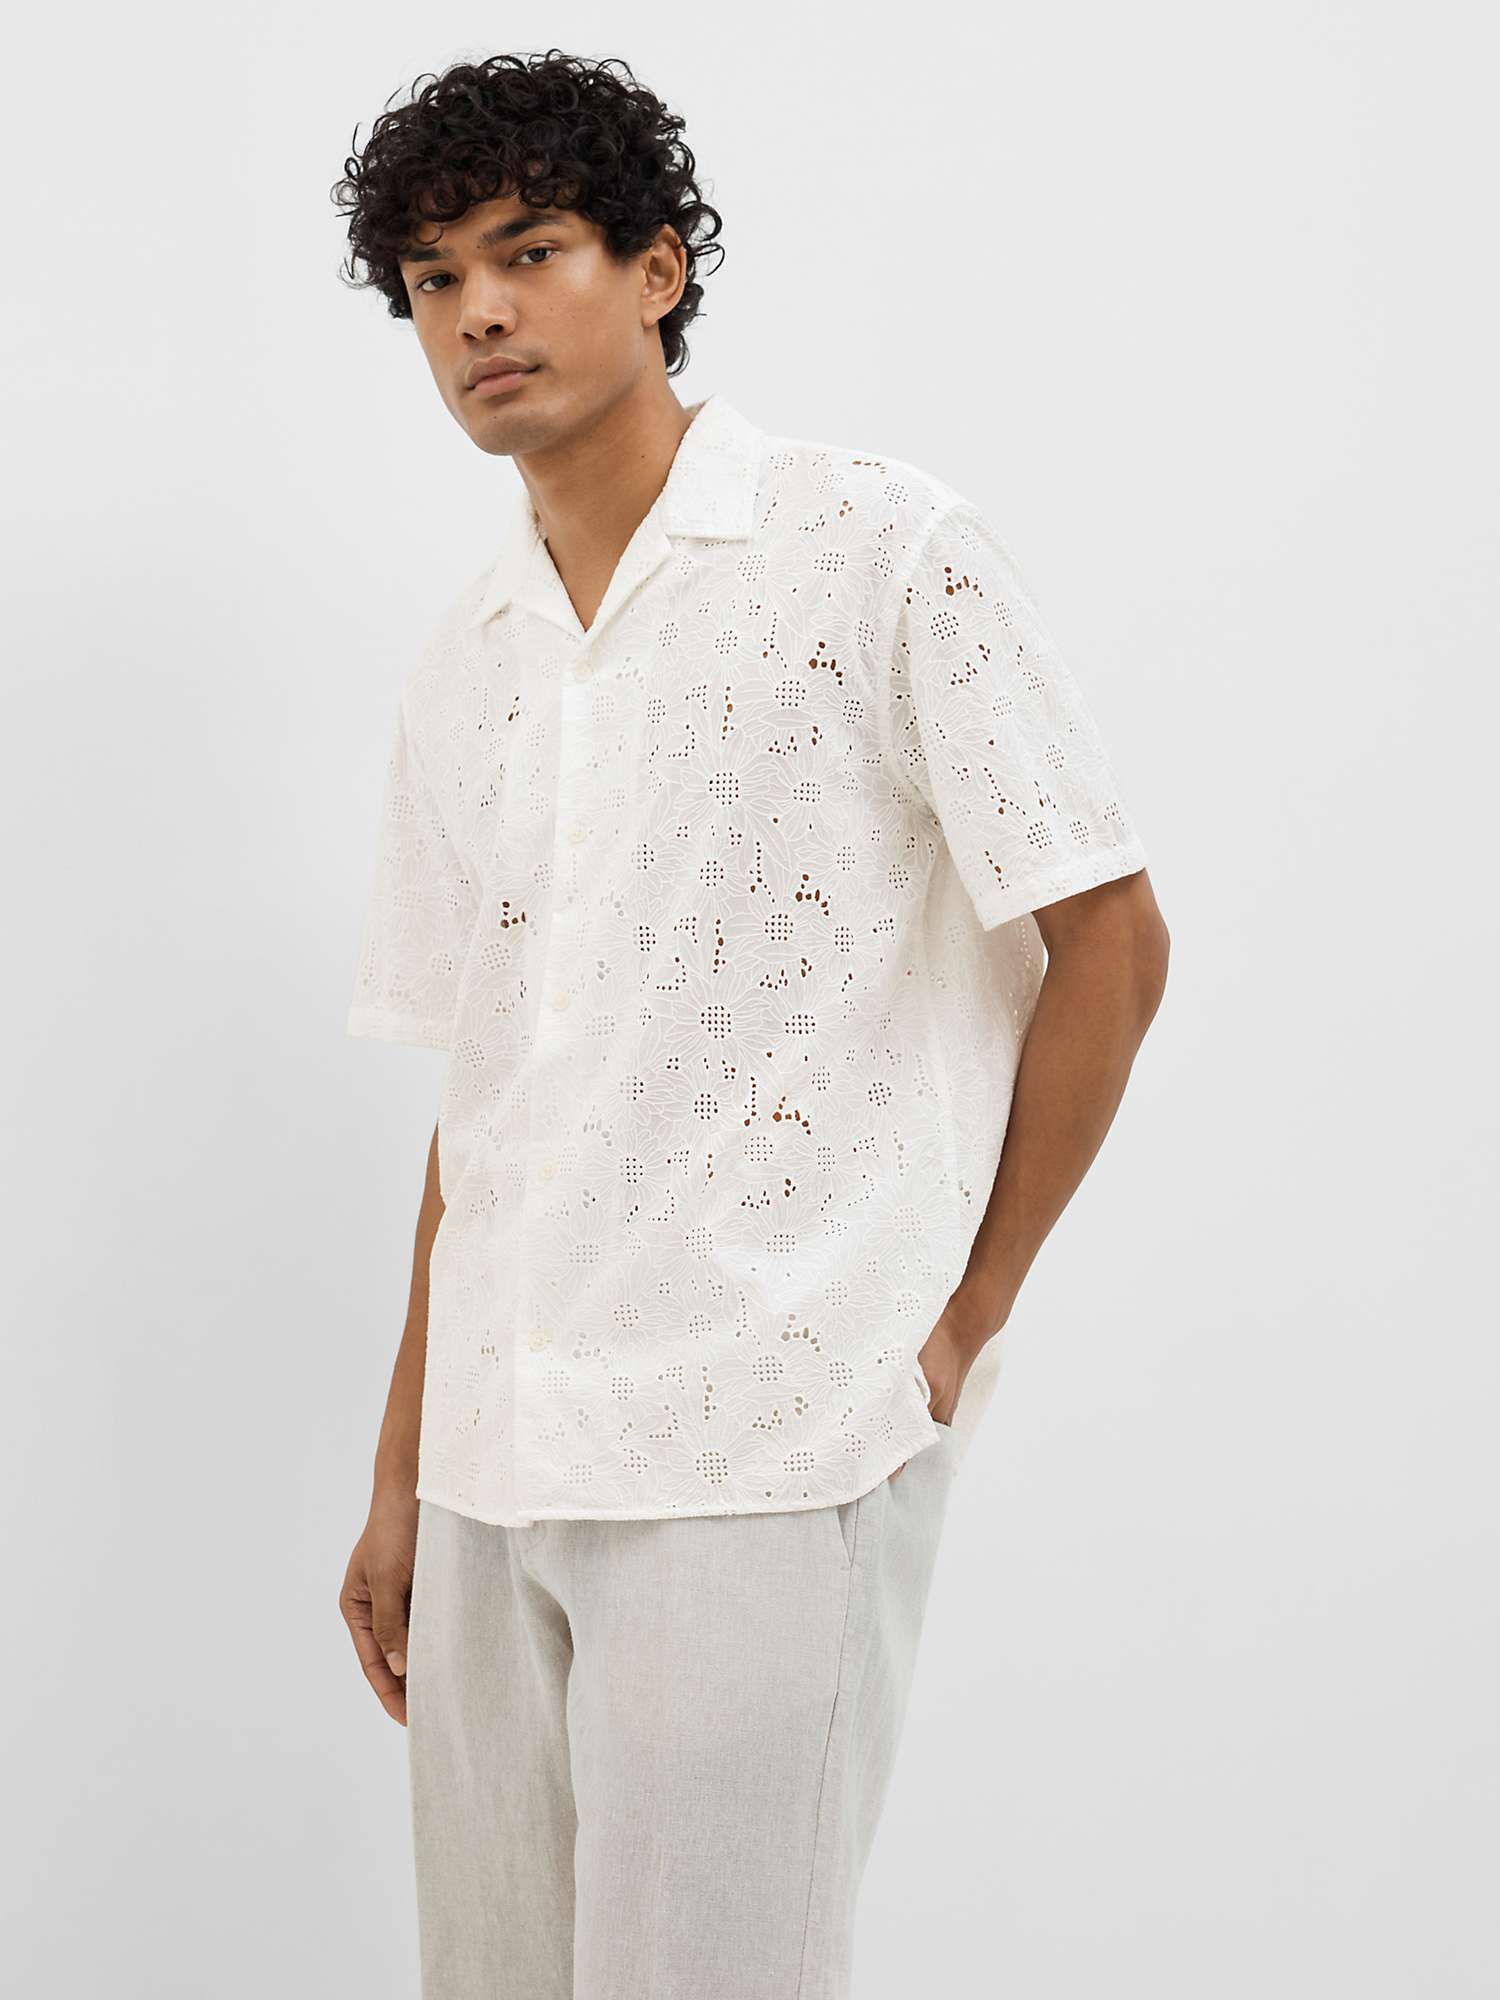 Buy SELECTED HOMME Jax Broderie Shirt, Bright White Online at johnlewis.com